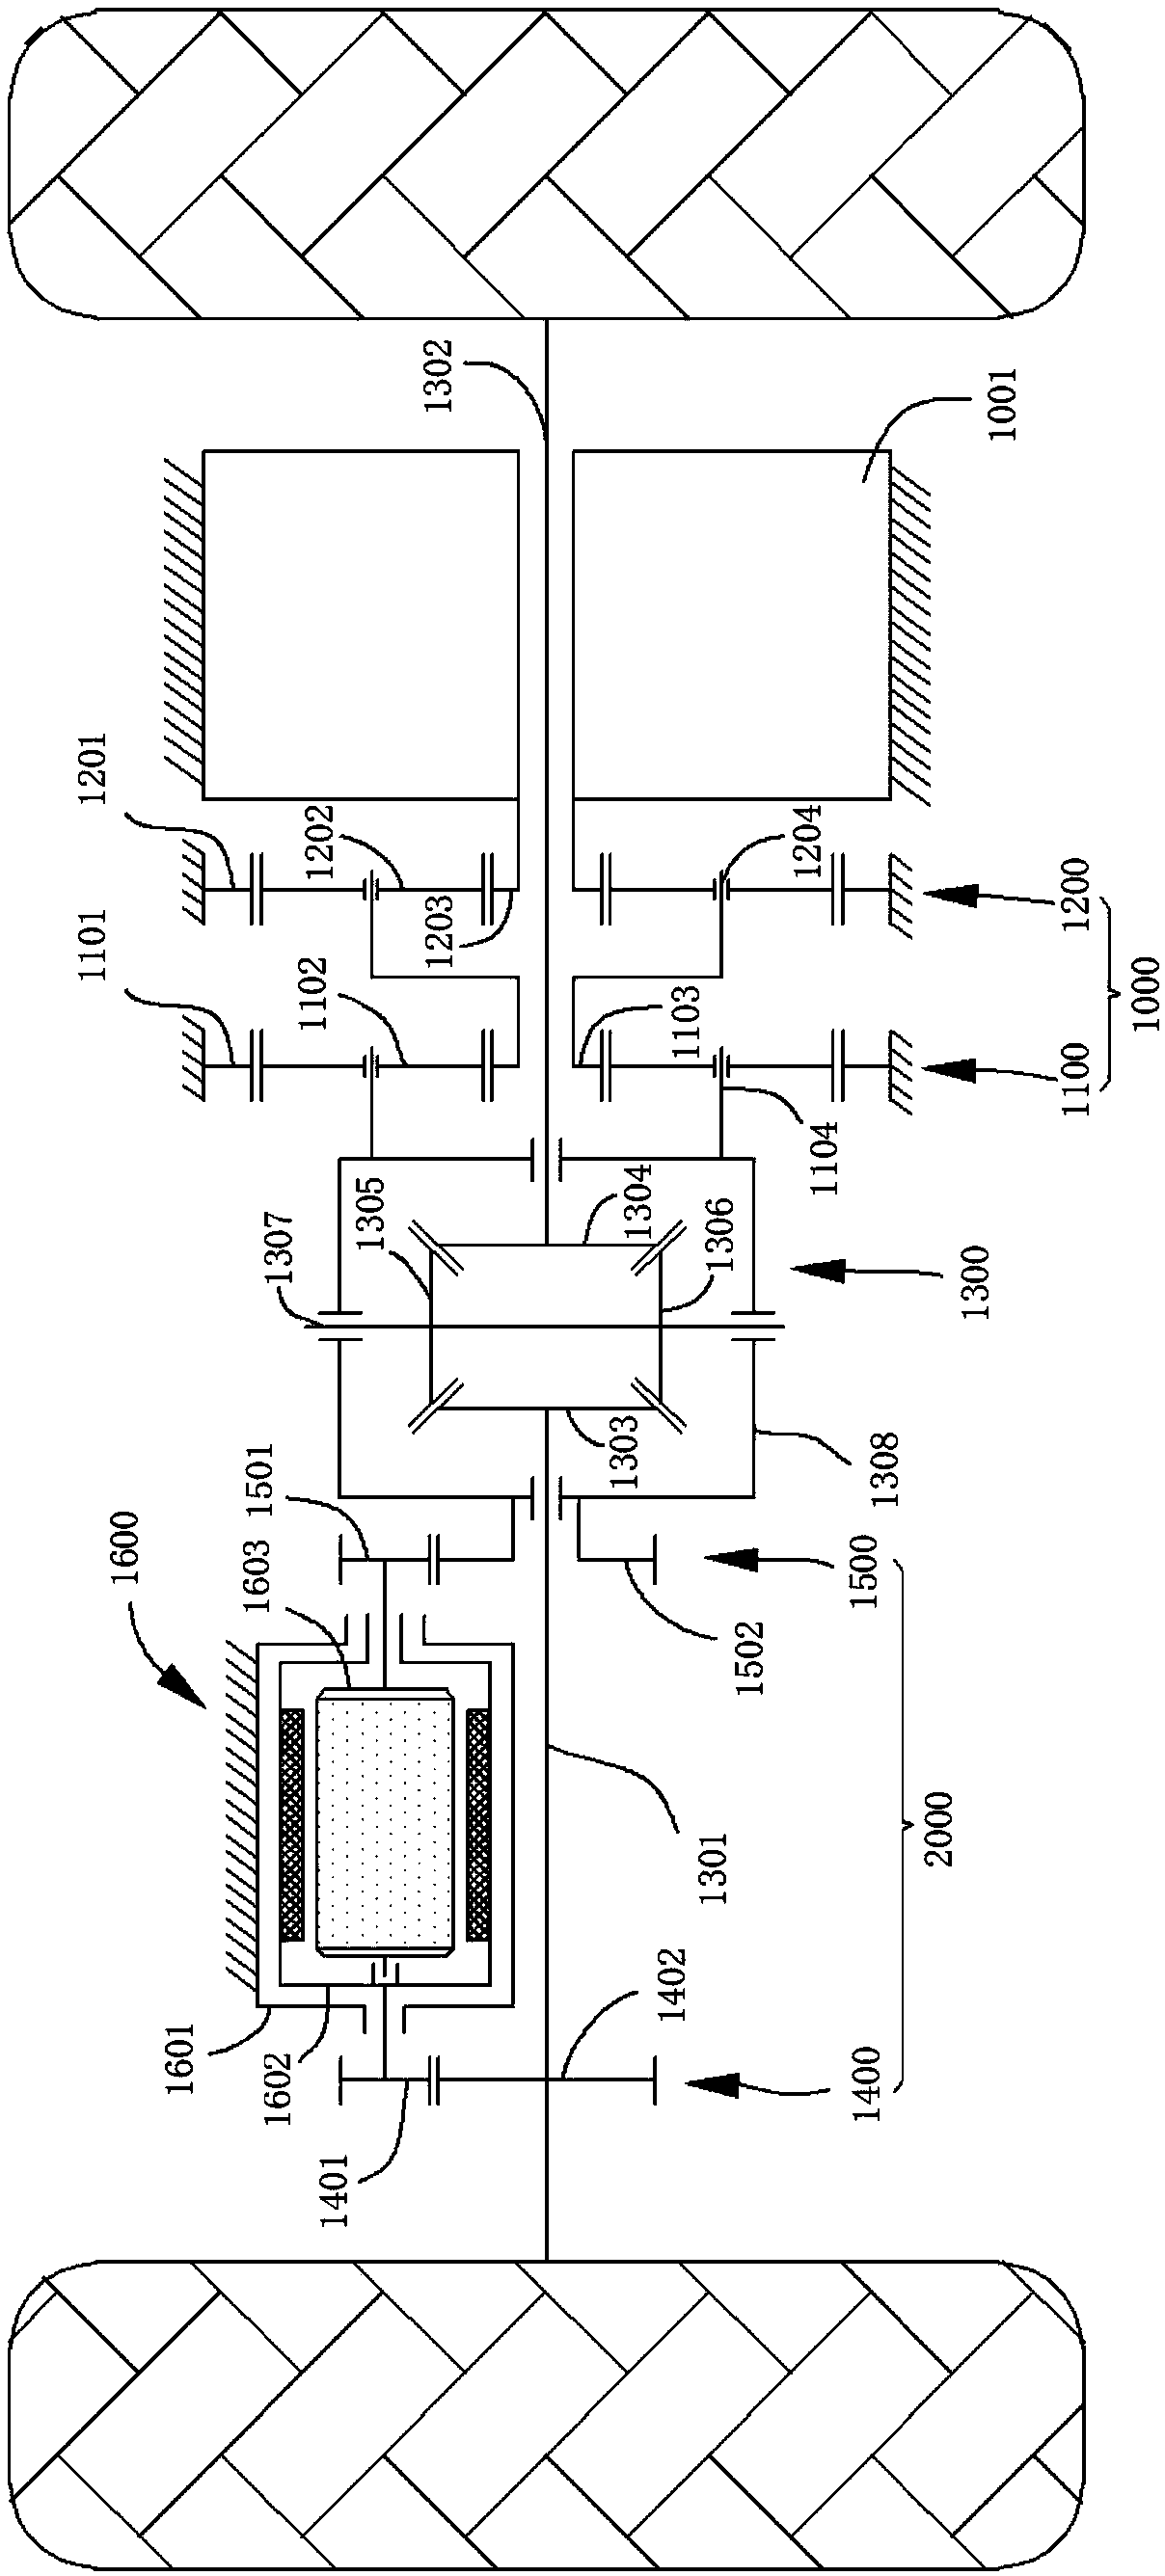 Torque directional distribution electric drive axle based on double-rotor motor